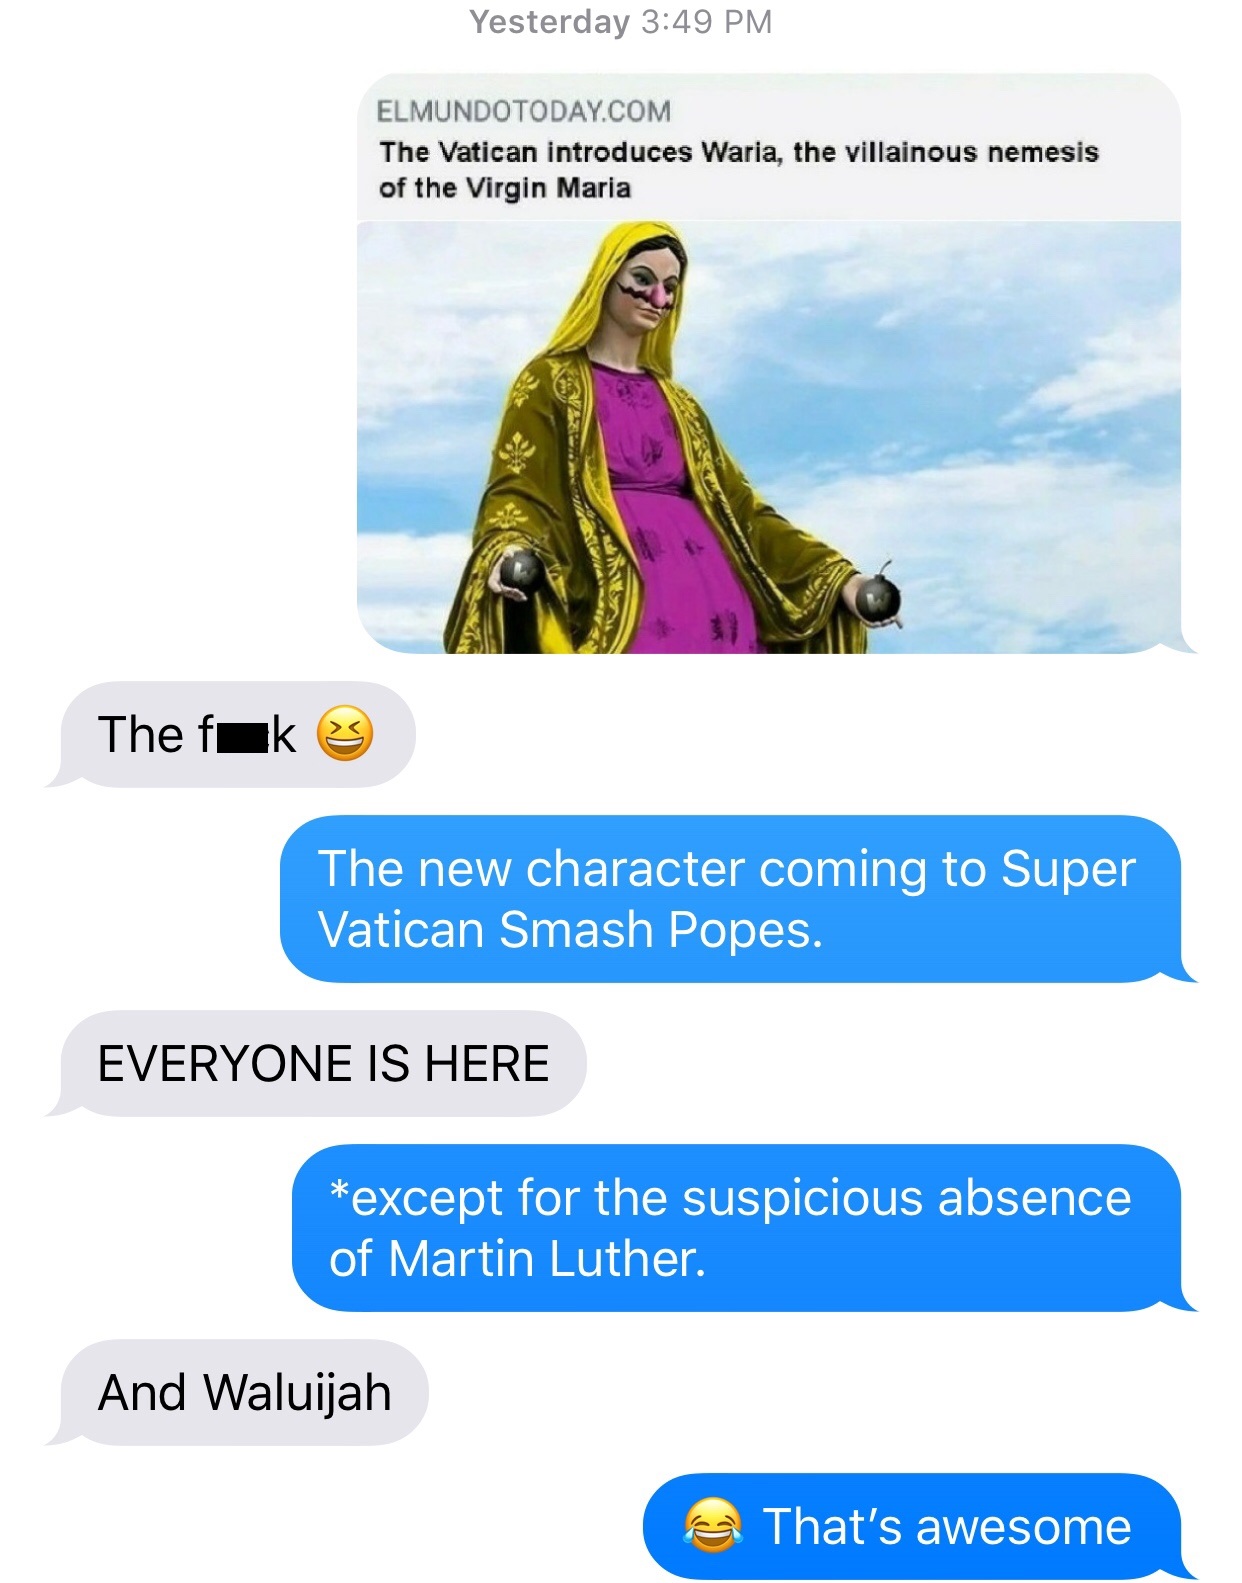 memes - web page - Yesterday Elmundotoday.Com The Vatican introduces Waria, the villainous nemesis of the Virgin Maria The fak The new character coming to Super Vatican Smash Popes. Everyone Is Here except for the suspicious absence of Martin Luther. And 